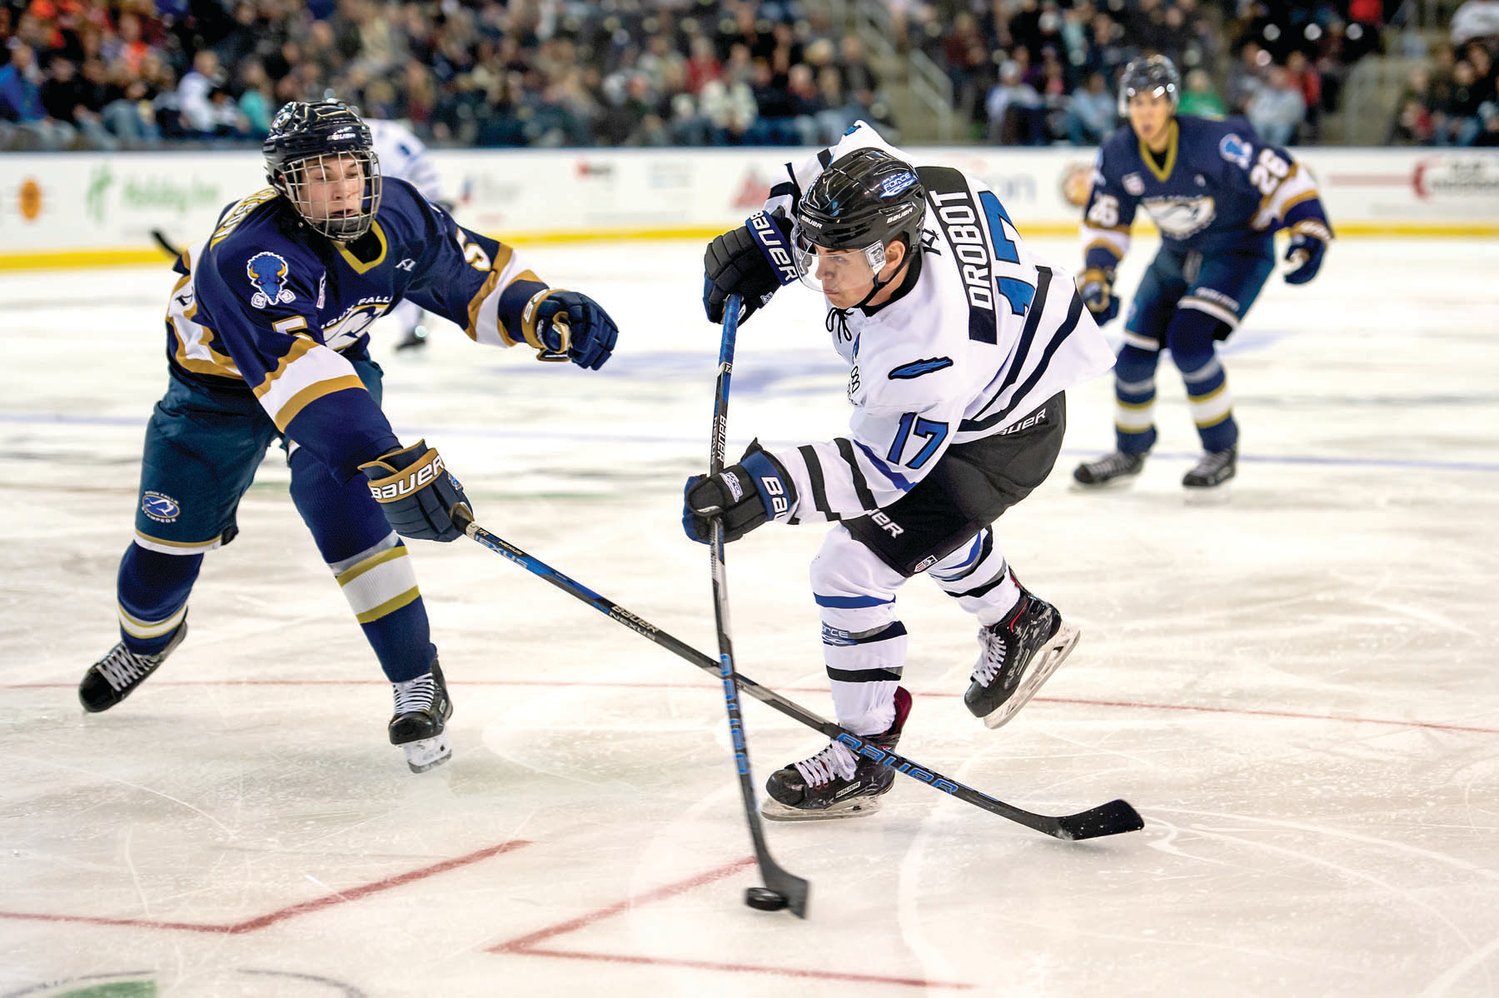 Council Rock South’s A.J. Drobot is captain of the USHL’s Fargo Force. The University of Maine commit scored two goals in Fargo’s two-game sweep of Green Bay last weekend. Photograph courtesy of Fargo Force/MJoy Photography